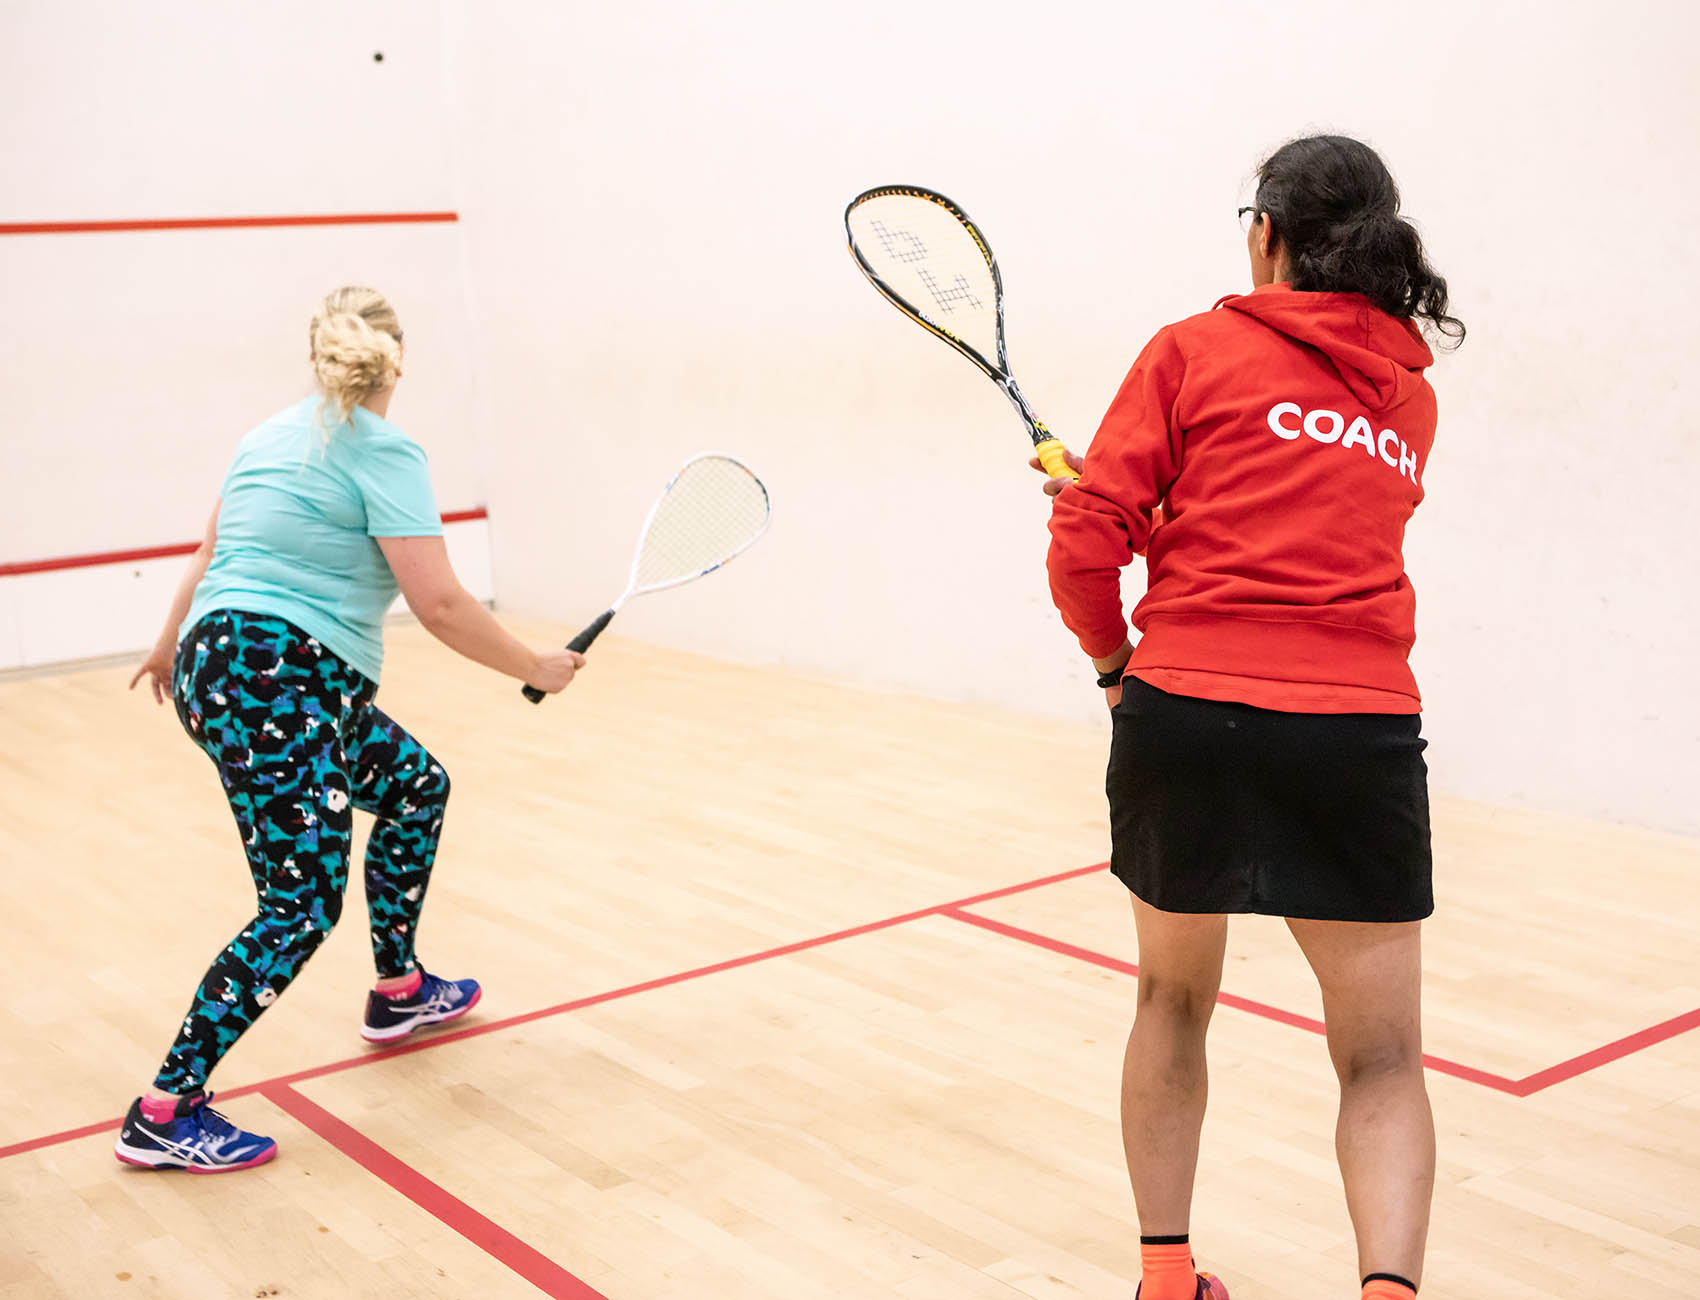 A squash player and coach on court